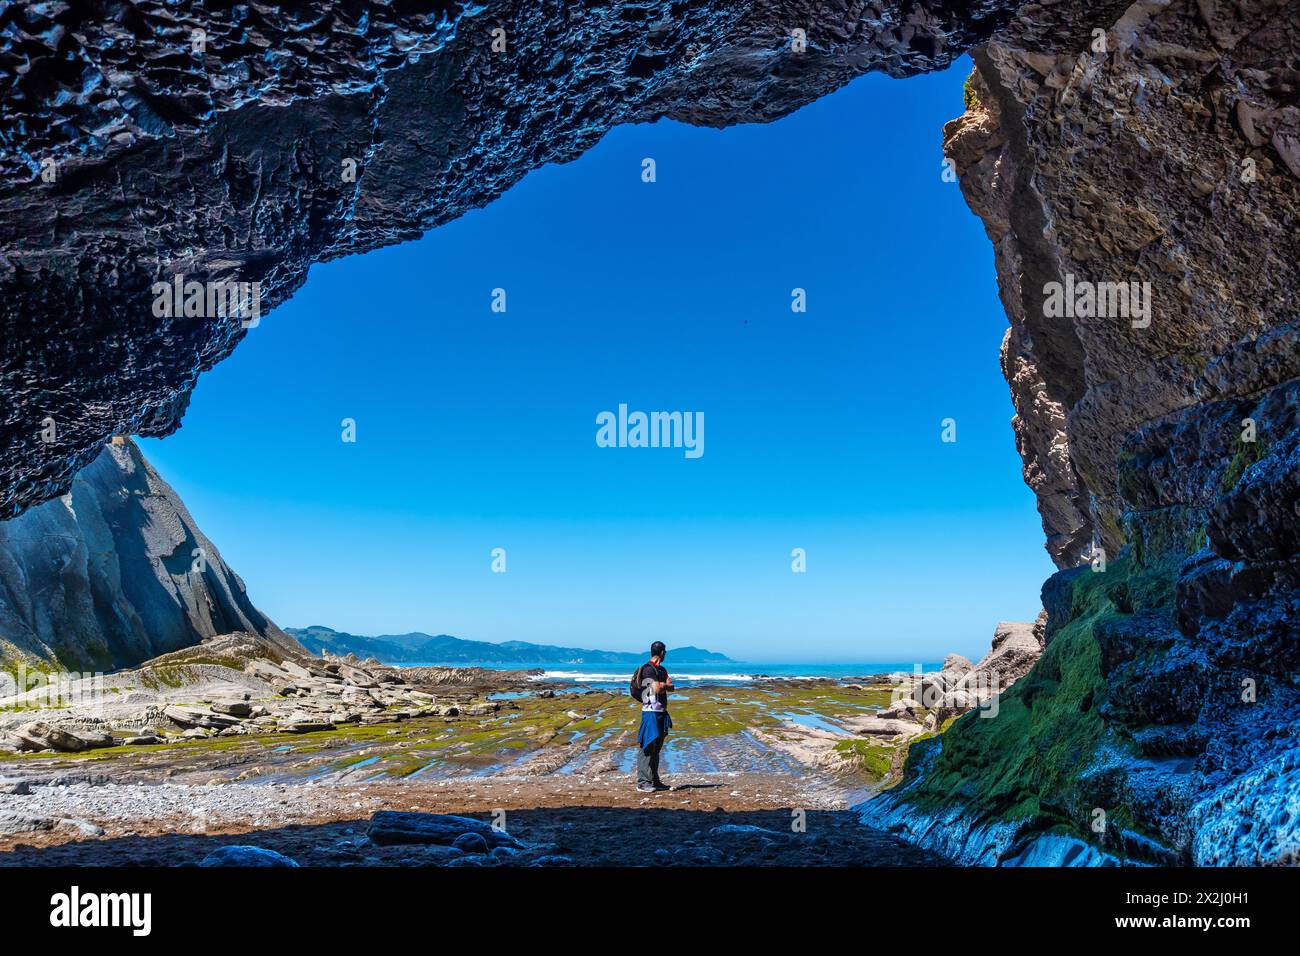 A hiker in the Algorri cove sea cave on the coast in the flysch of Zumaia, Gipuzkoa. Basque Country Stock Photo